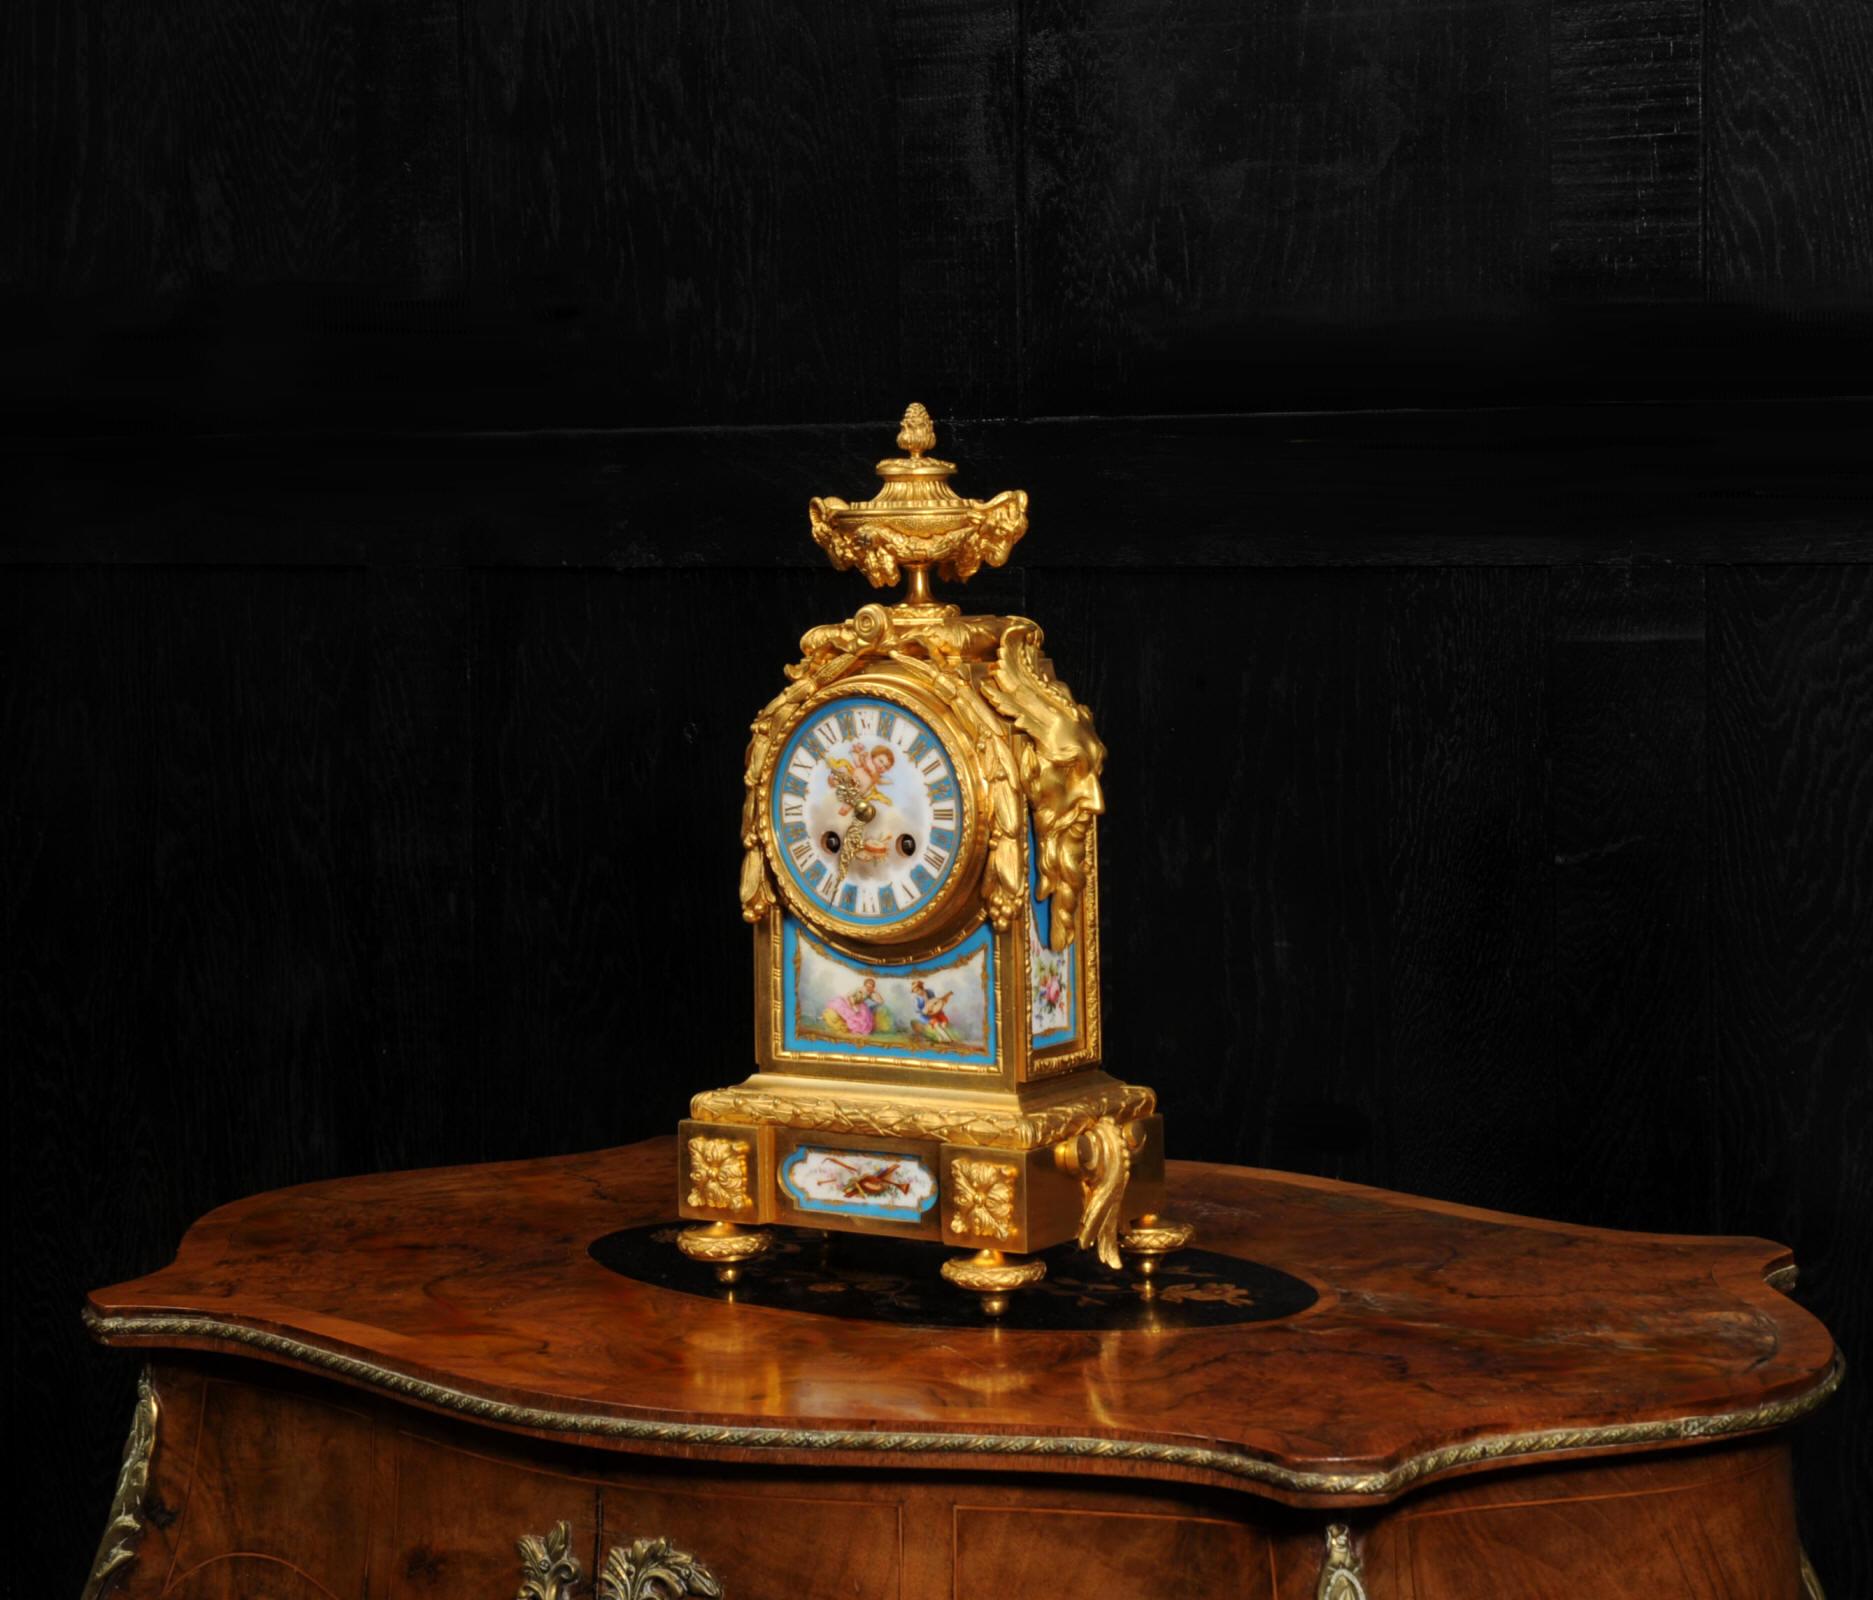 Hand-Painted Early Ormolu and Sevres Porcelain Antique French Clock - Japy Fils Fully Working For Sale